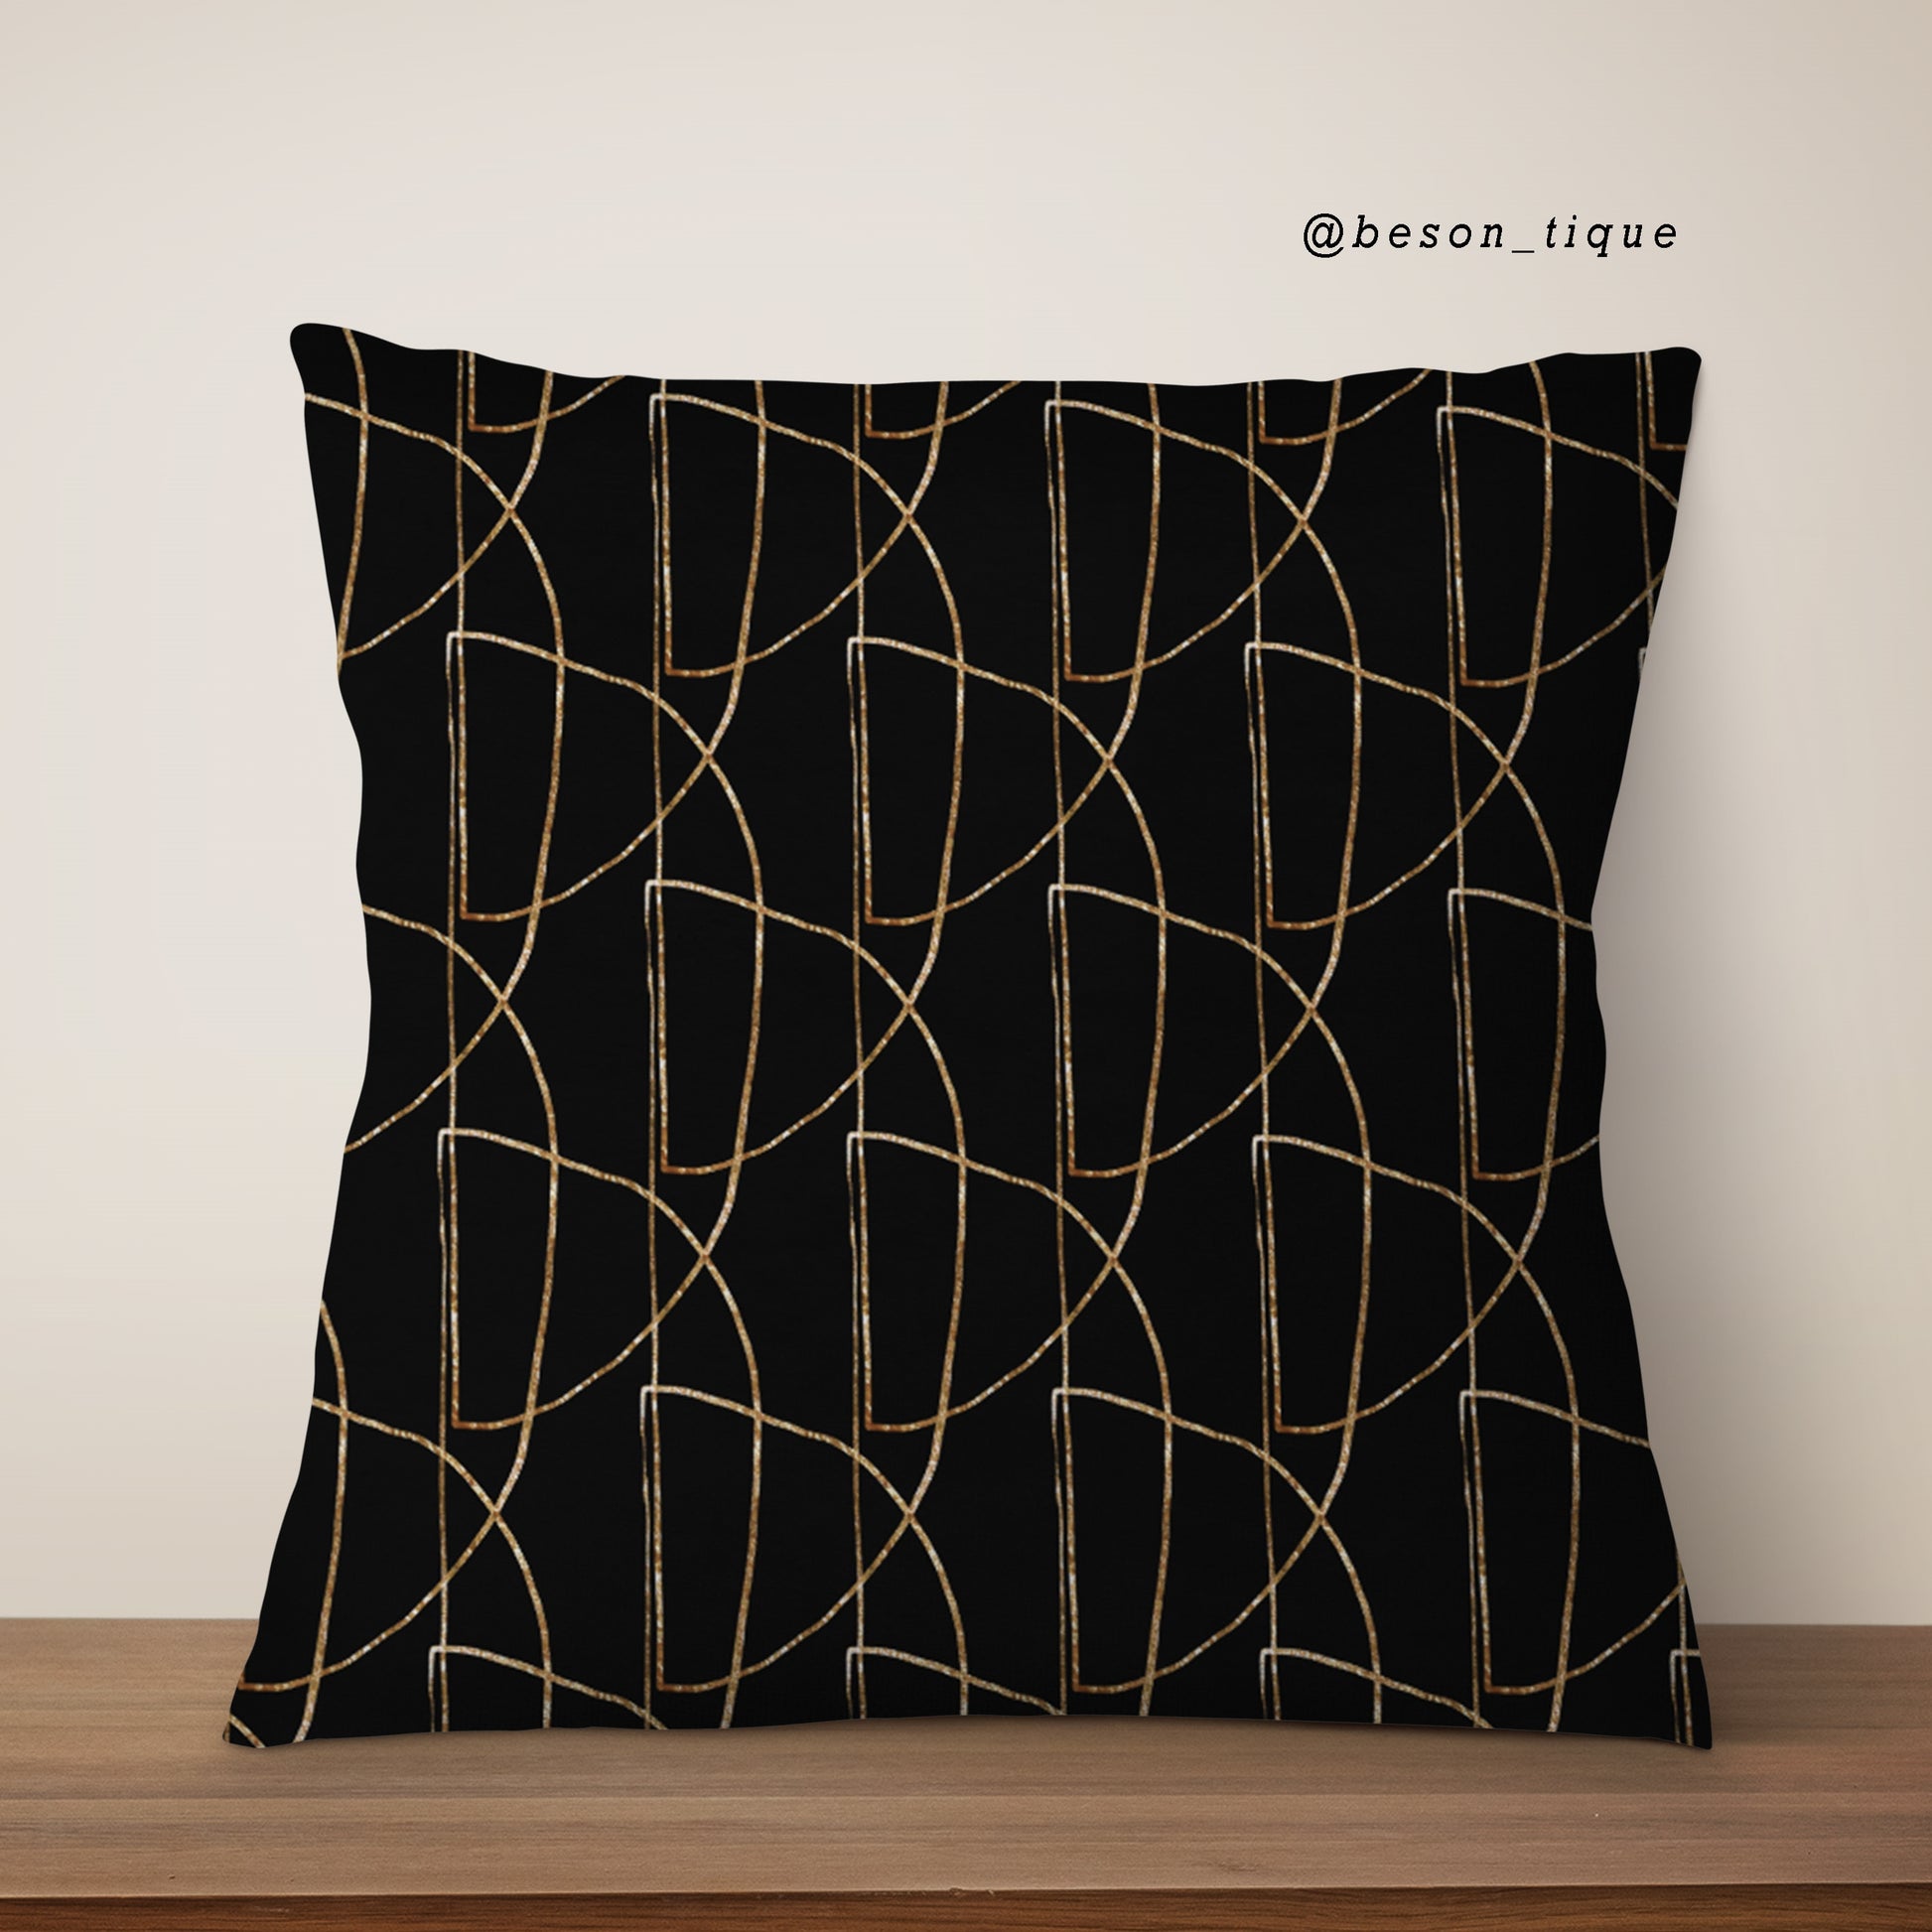 Black Gold Pattern Pillow Cushion & Cover, Abstract Decorative Pillow, Sofa Living Room Bedroom Decor Besontique